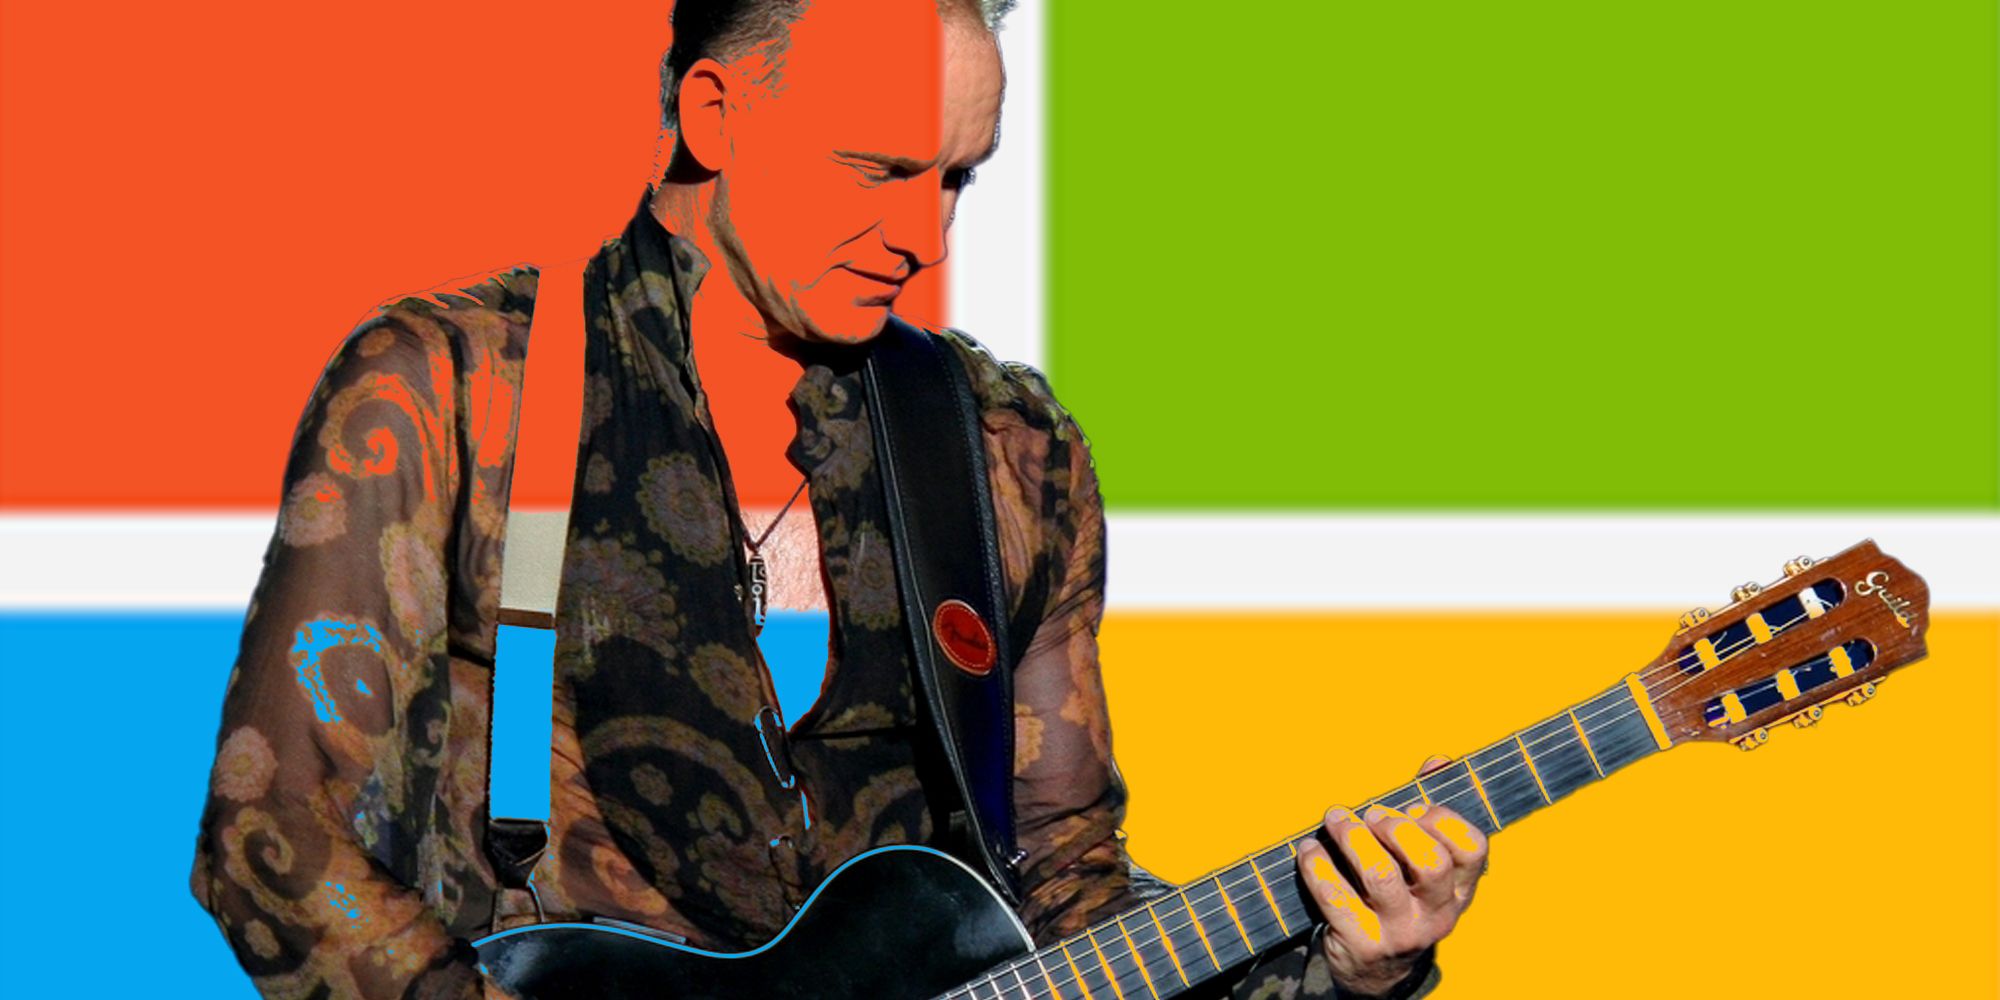 The musician Sting in front of the Microsoft logo